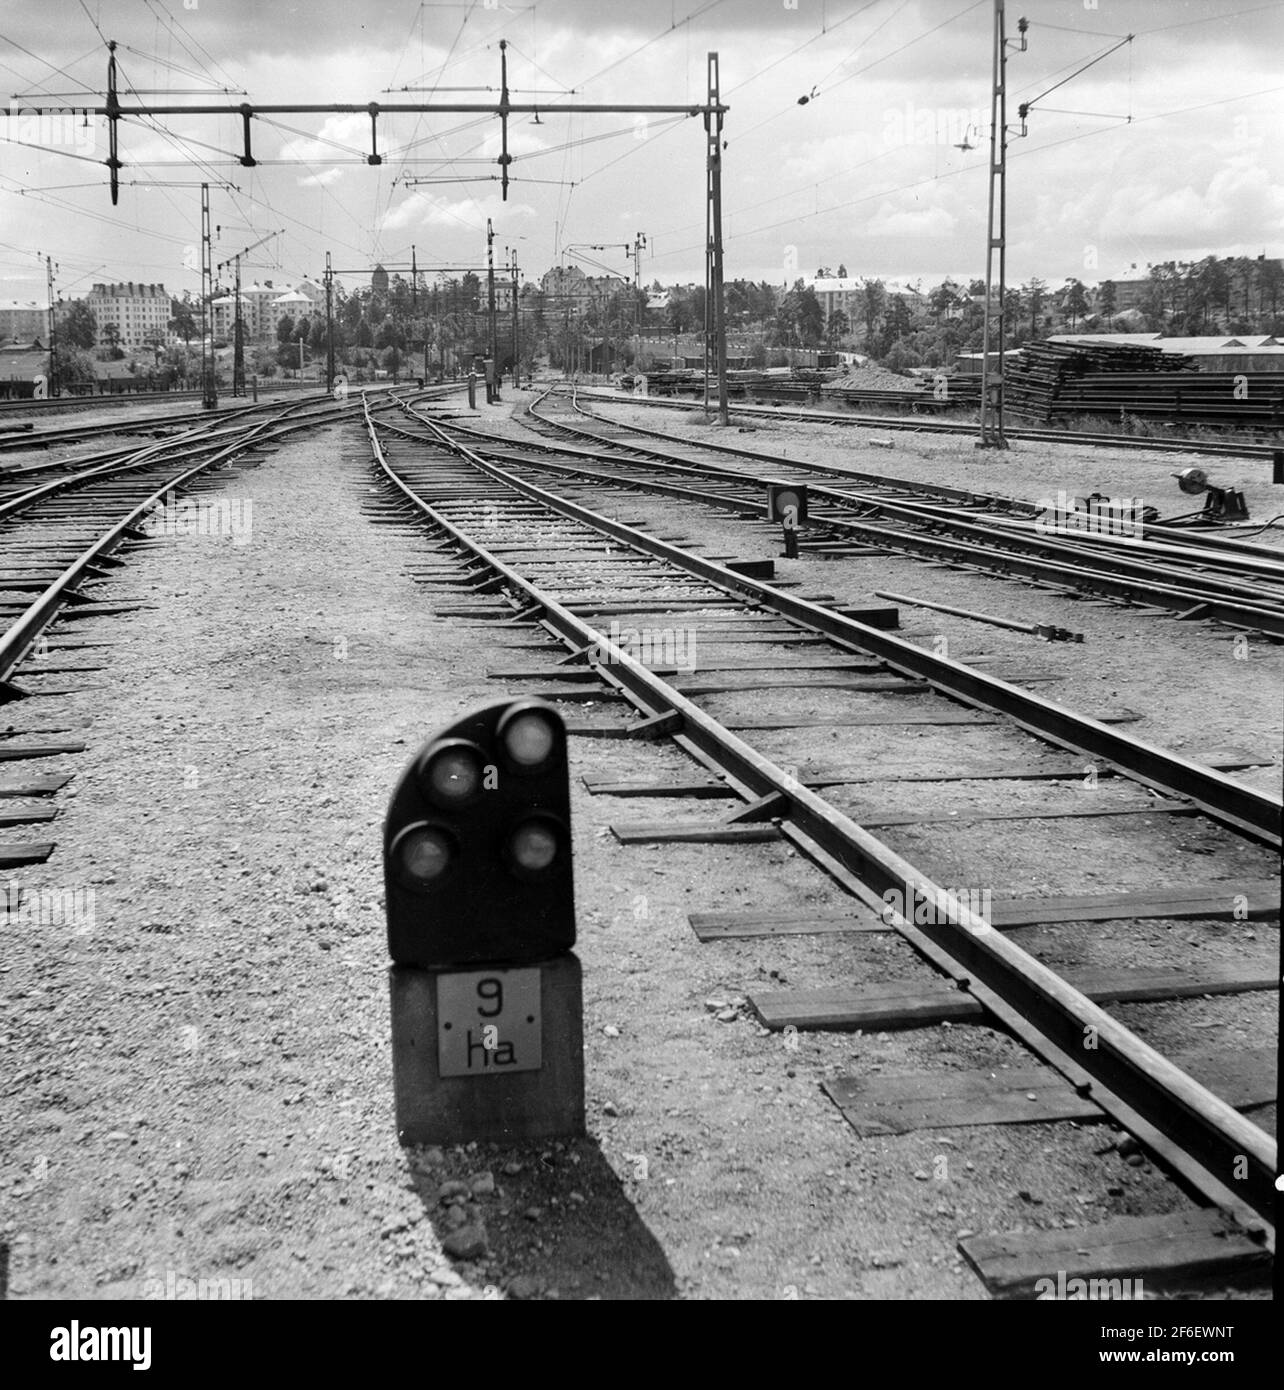 Harplinge railway with society in the background. In the foreground a dwarf signal. Stock Photo